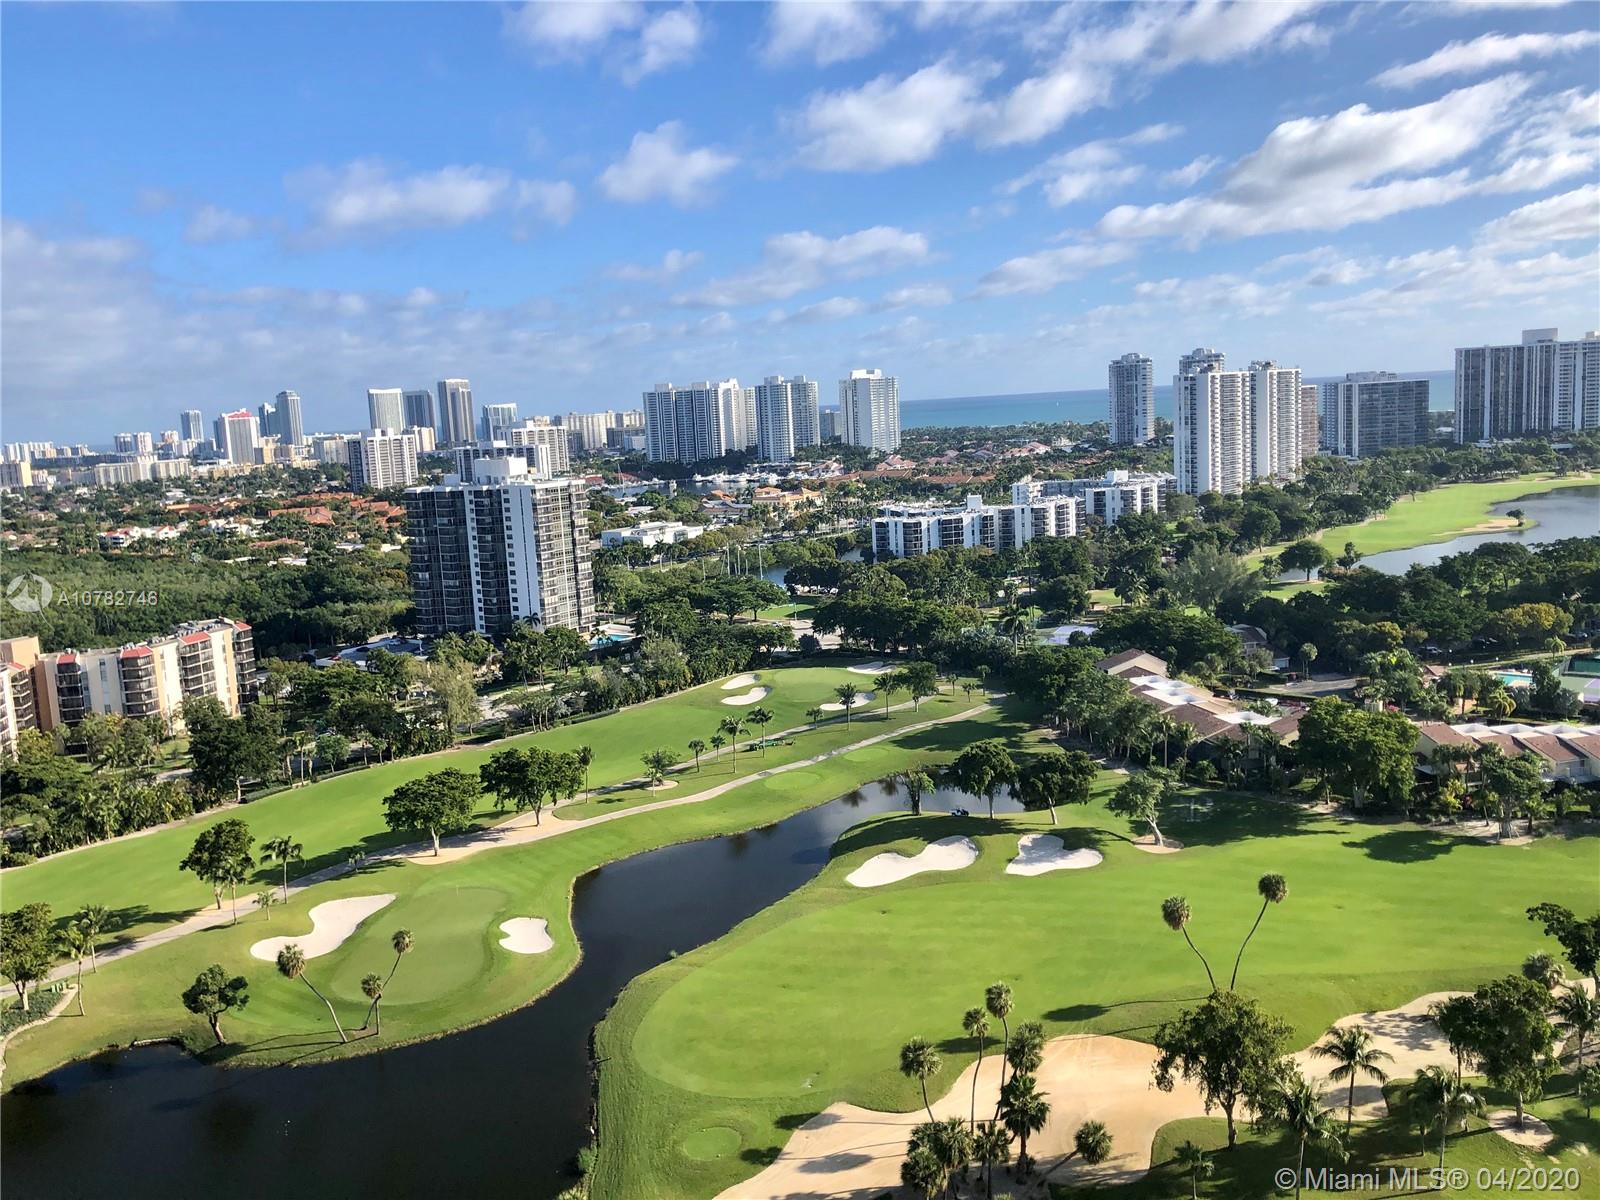 Penthouse Lifestyle!  Panoramic View over the Golf Course, Aventura and the Ocean from your balcony.Coronado Condo, PH-31.